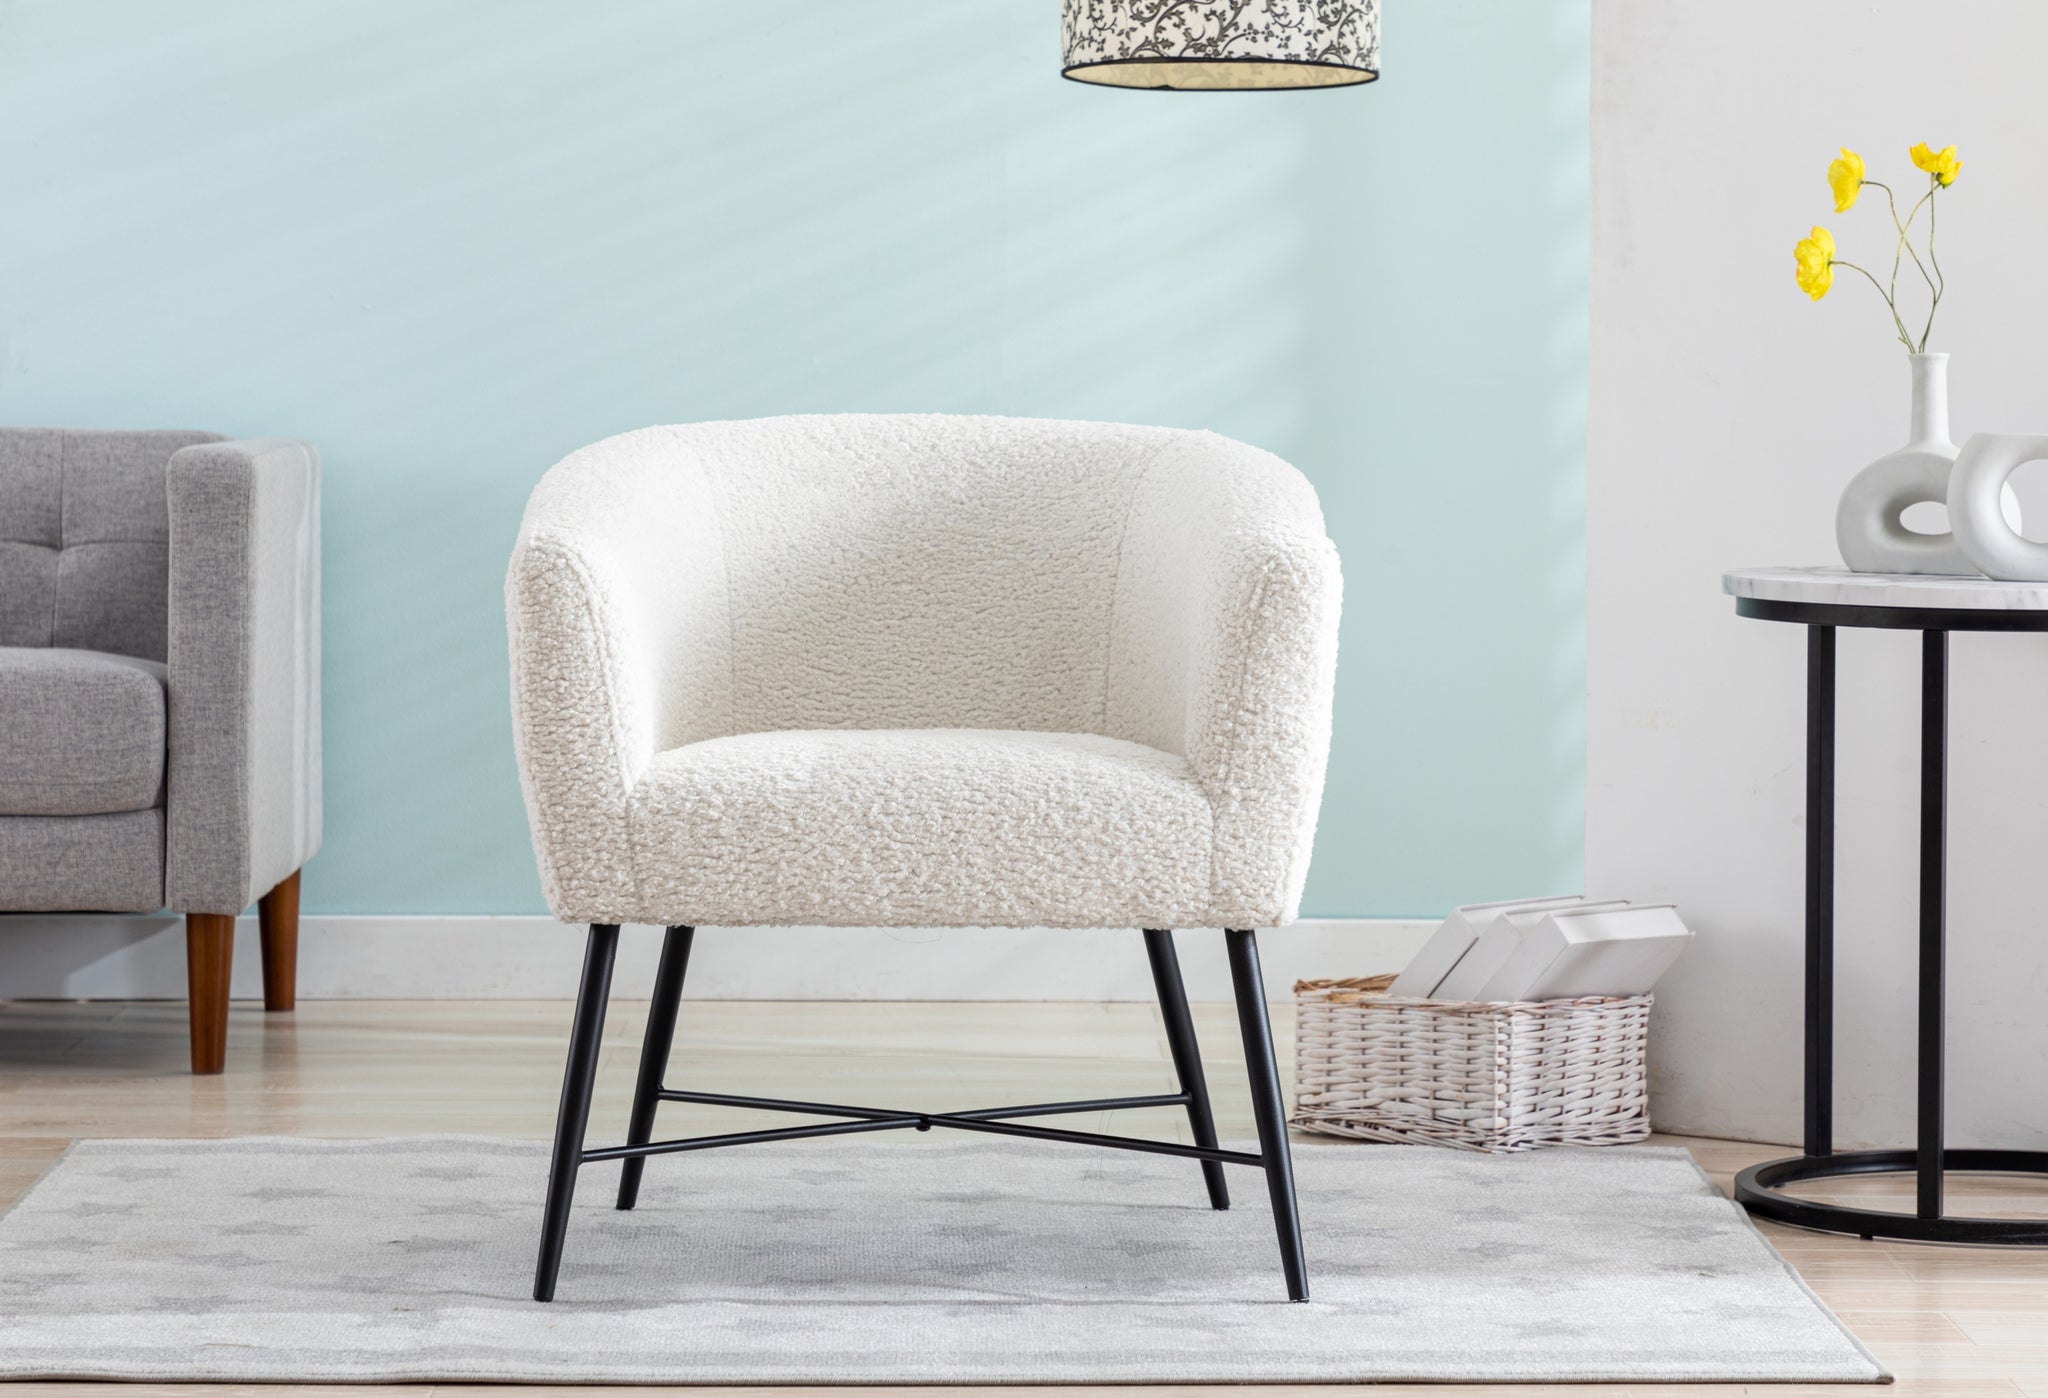 Modern Style 1pc Accent Chair White Sheep Wool Like white-primary living space-luxury-fabric